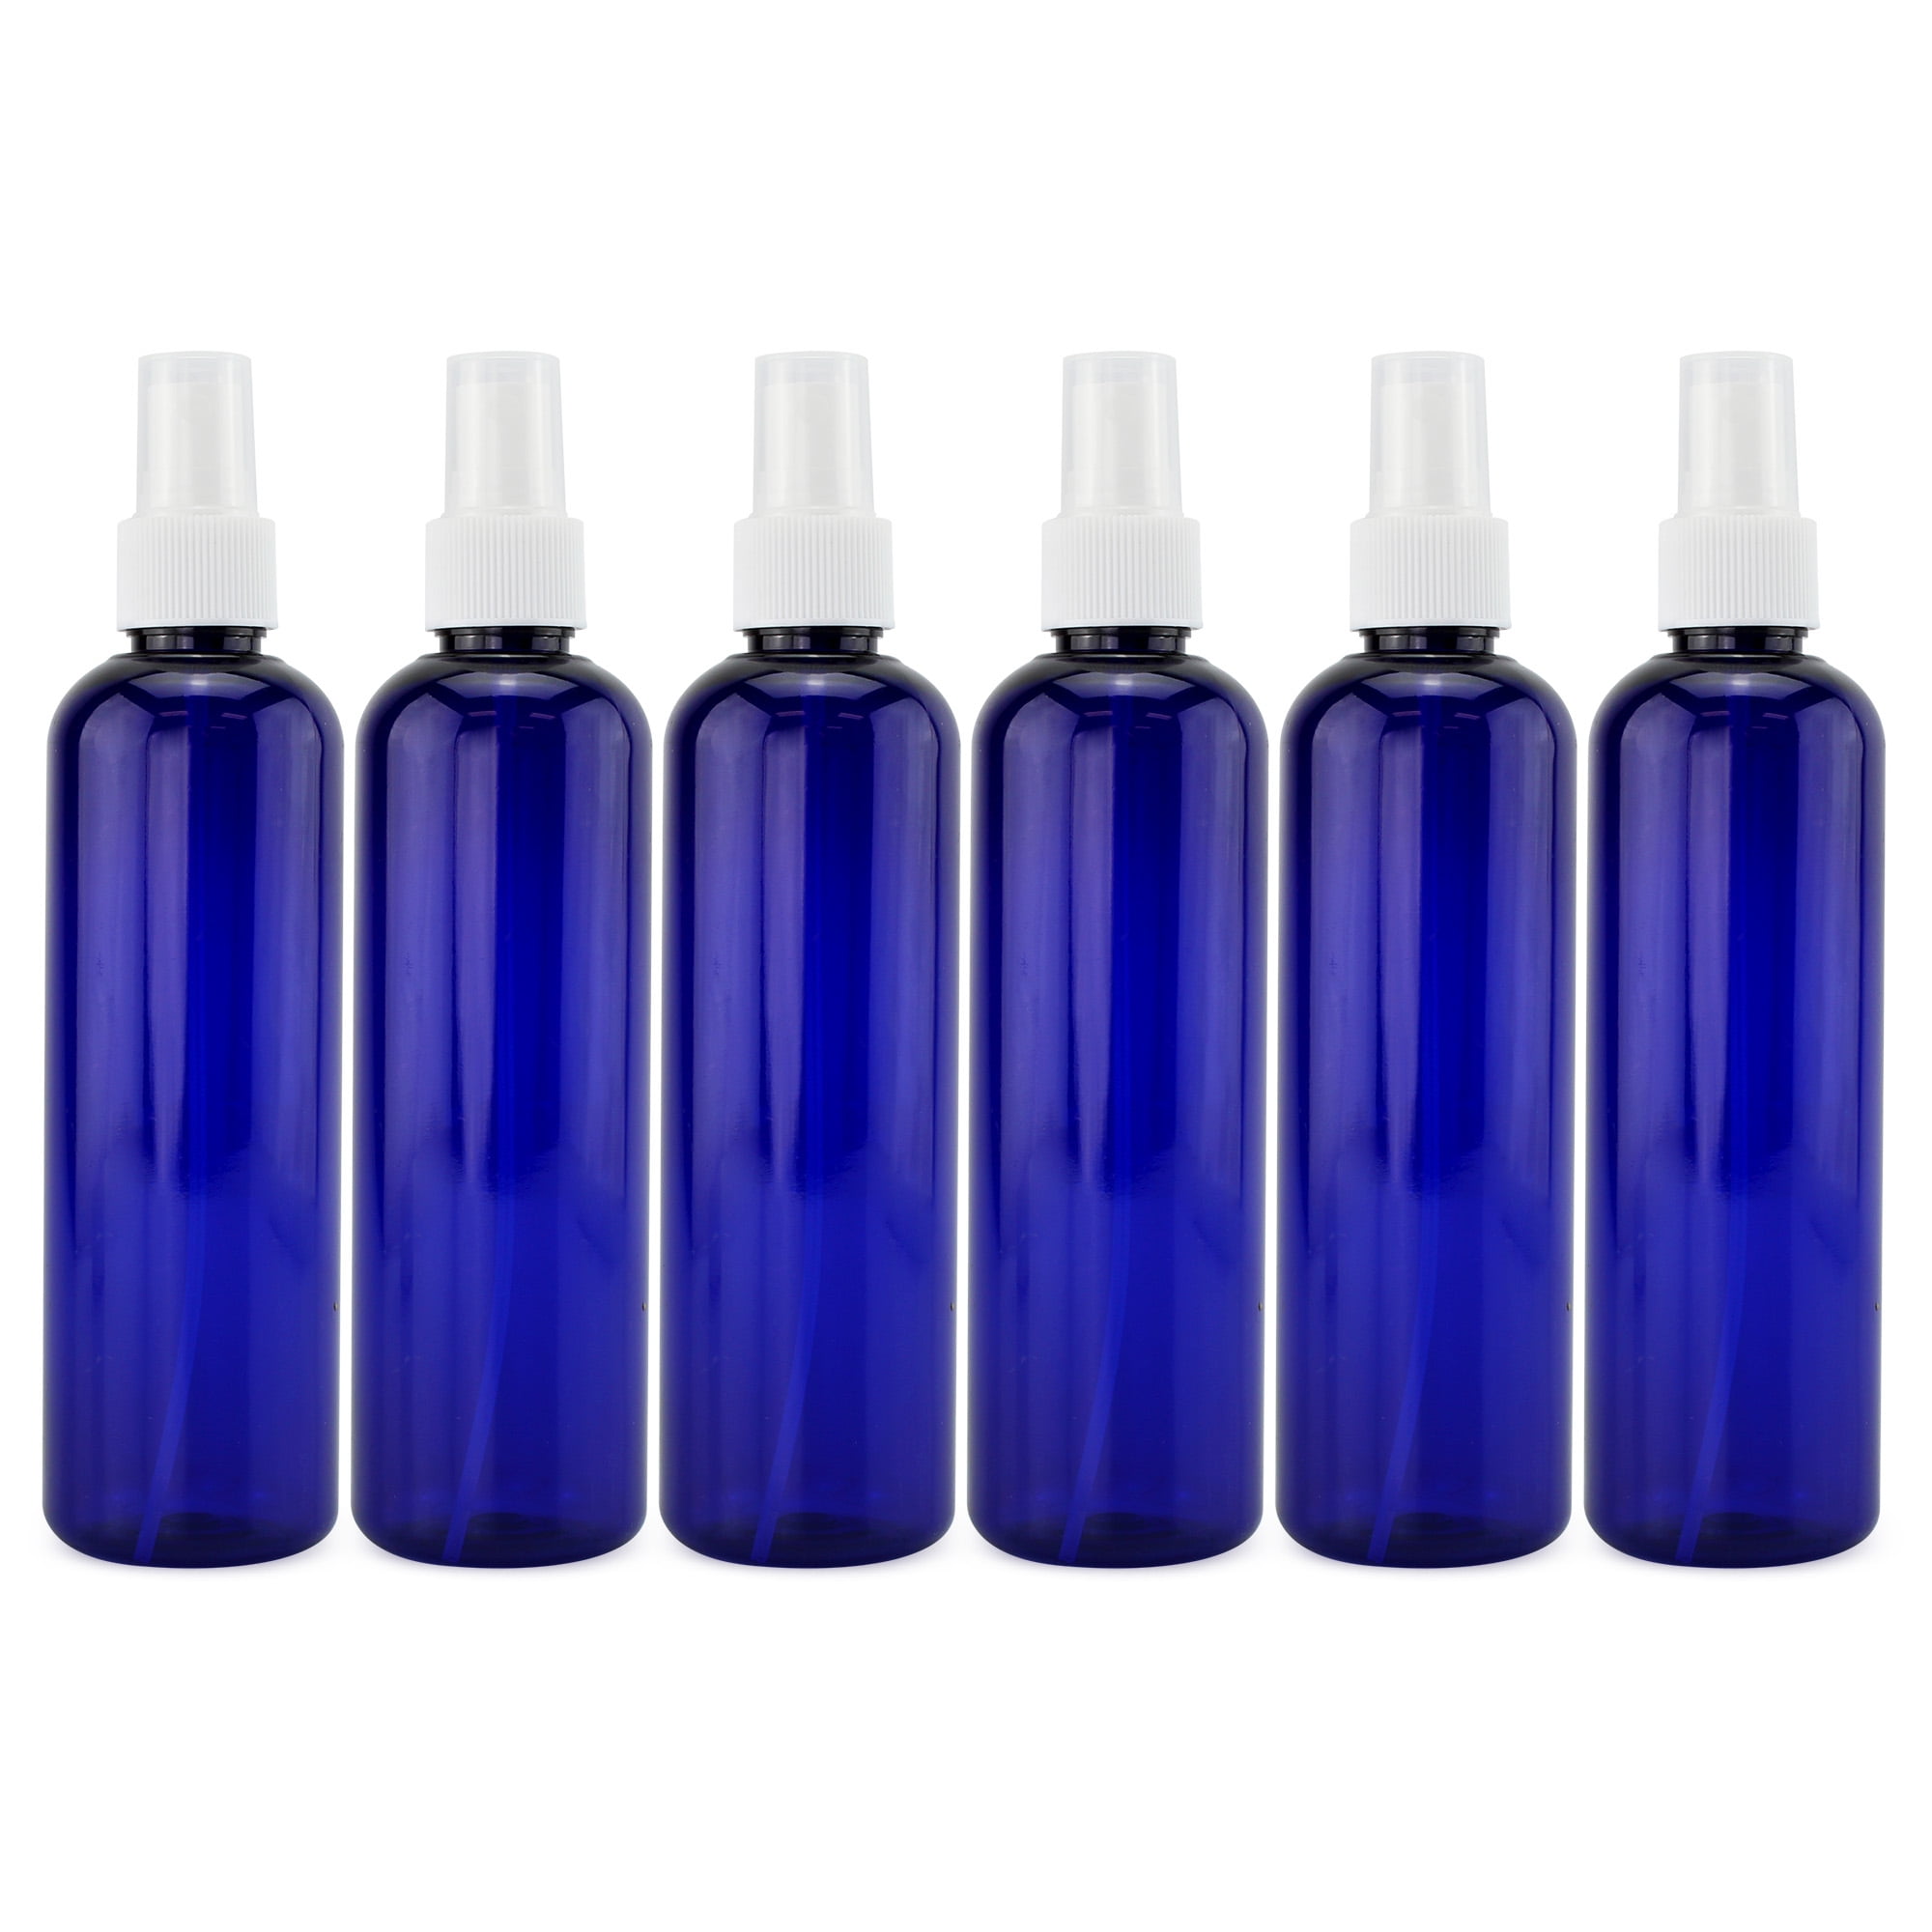 Plastic Spray Bottles, Leak Proof, BPA Free Material, Small Spray Bottle,  Adjustable Trigger Mist to Stream And Off Modes